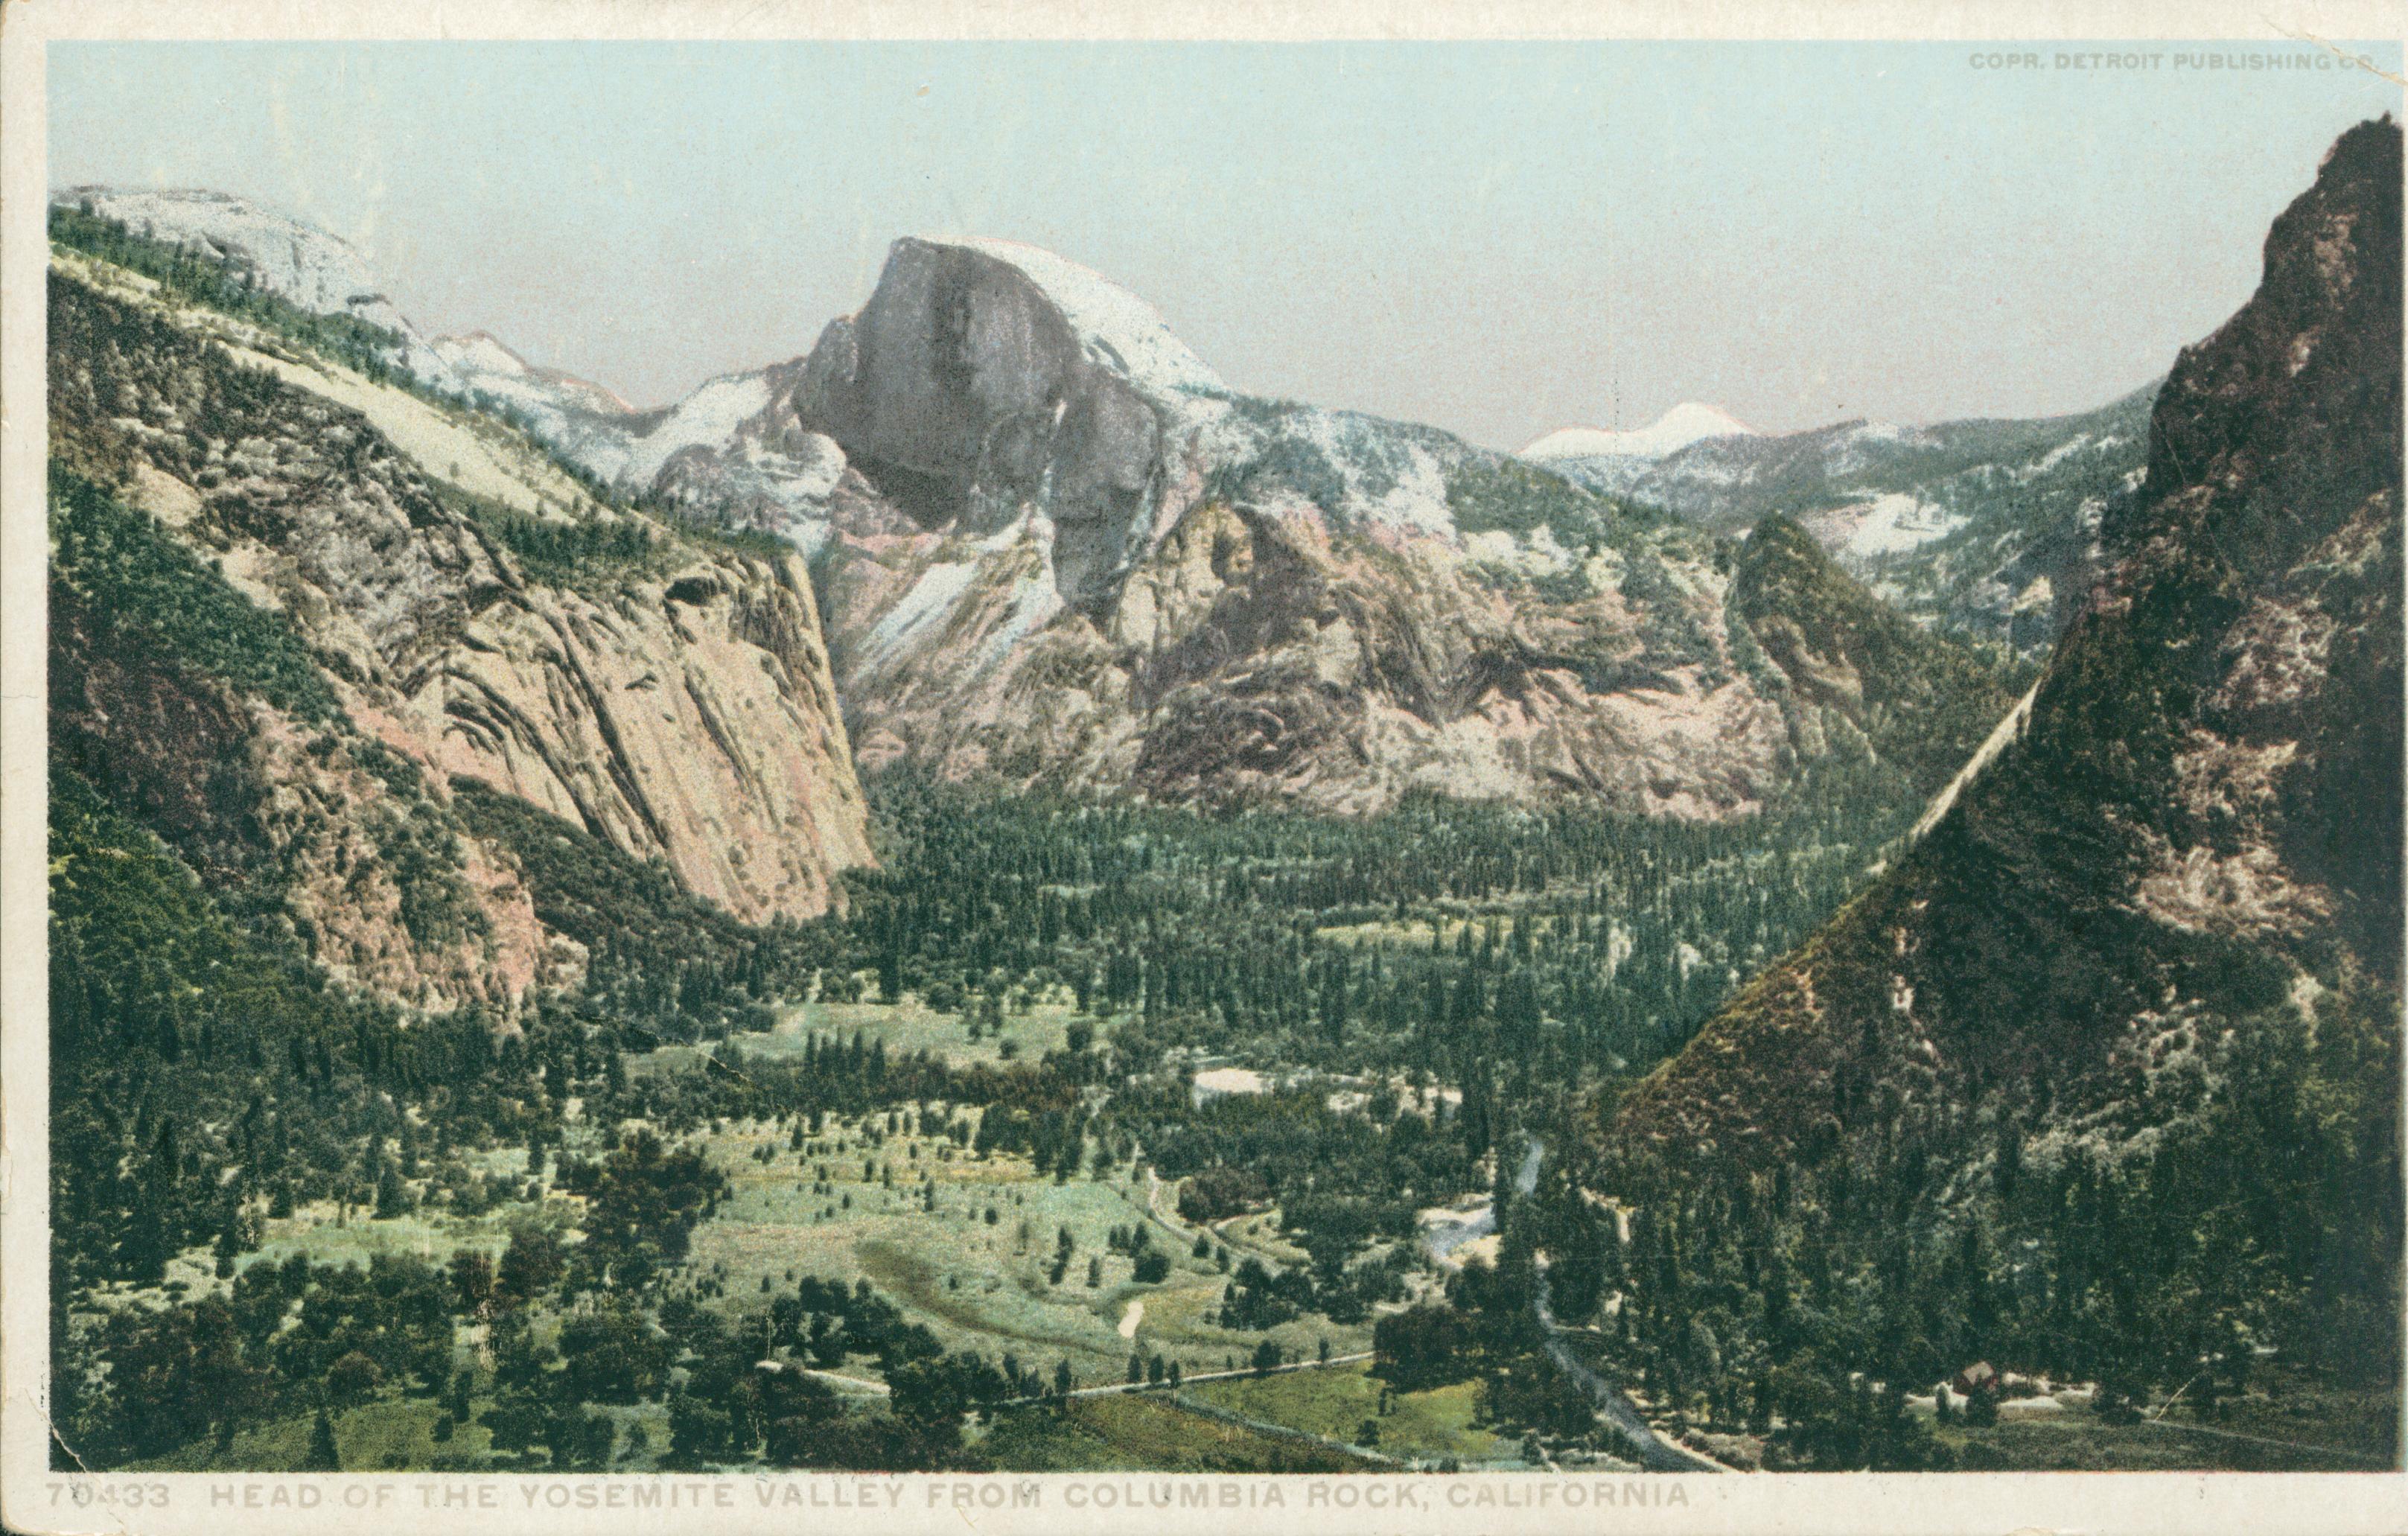 Shows a mountaintop view of Yosemite Valley with Half Dome in the center.